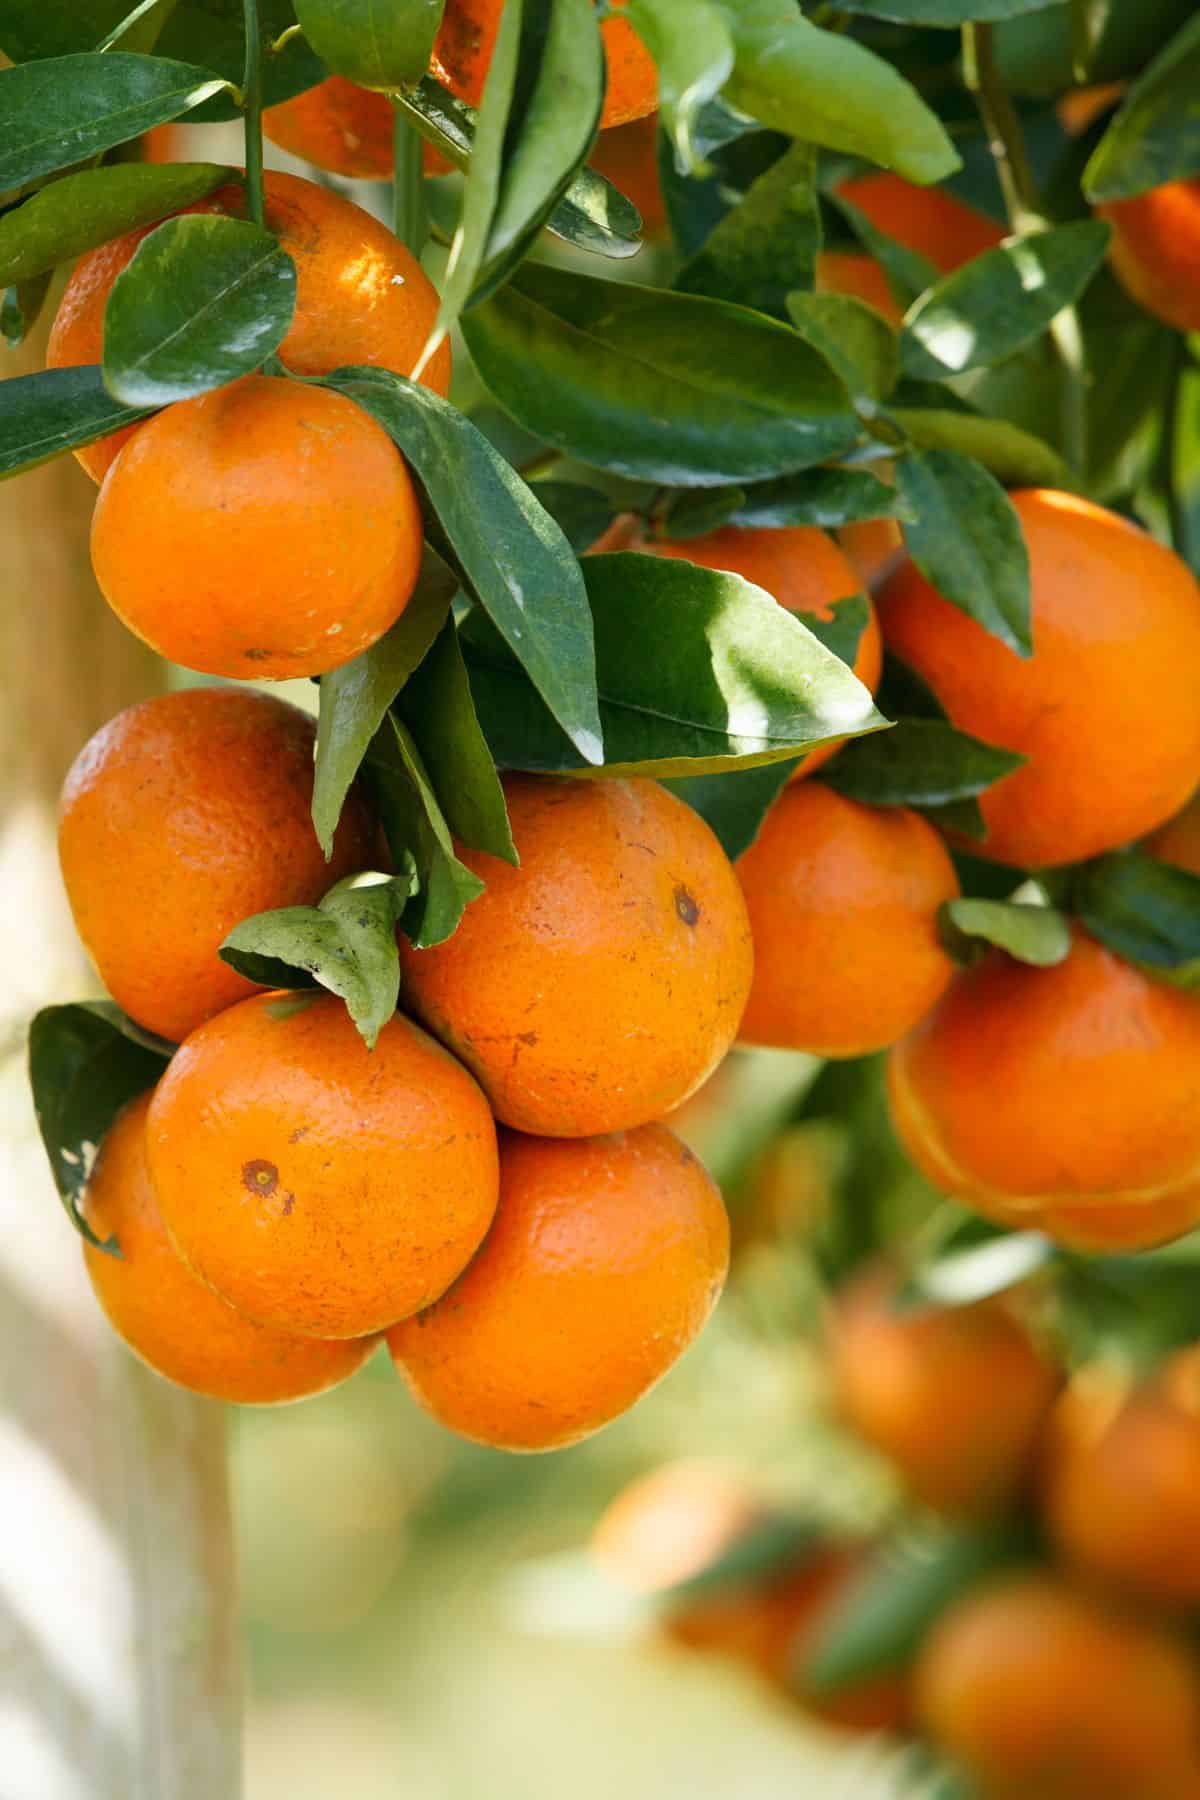 oranges hanging in a tree.